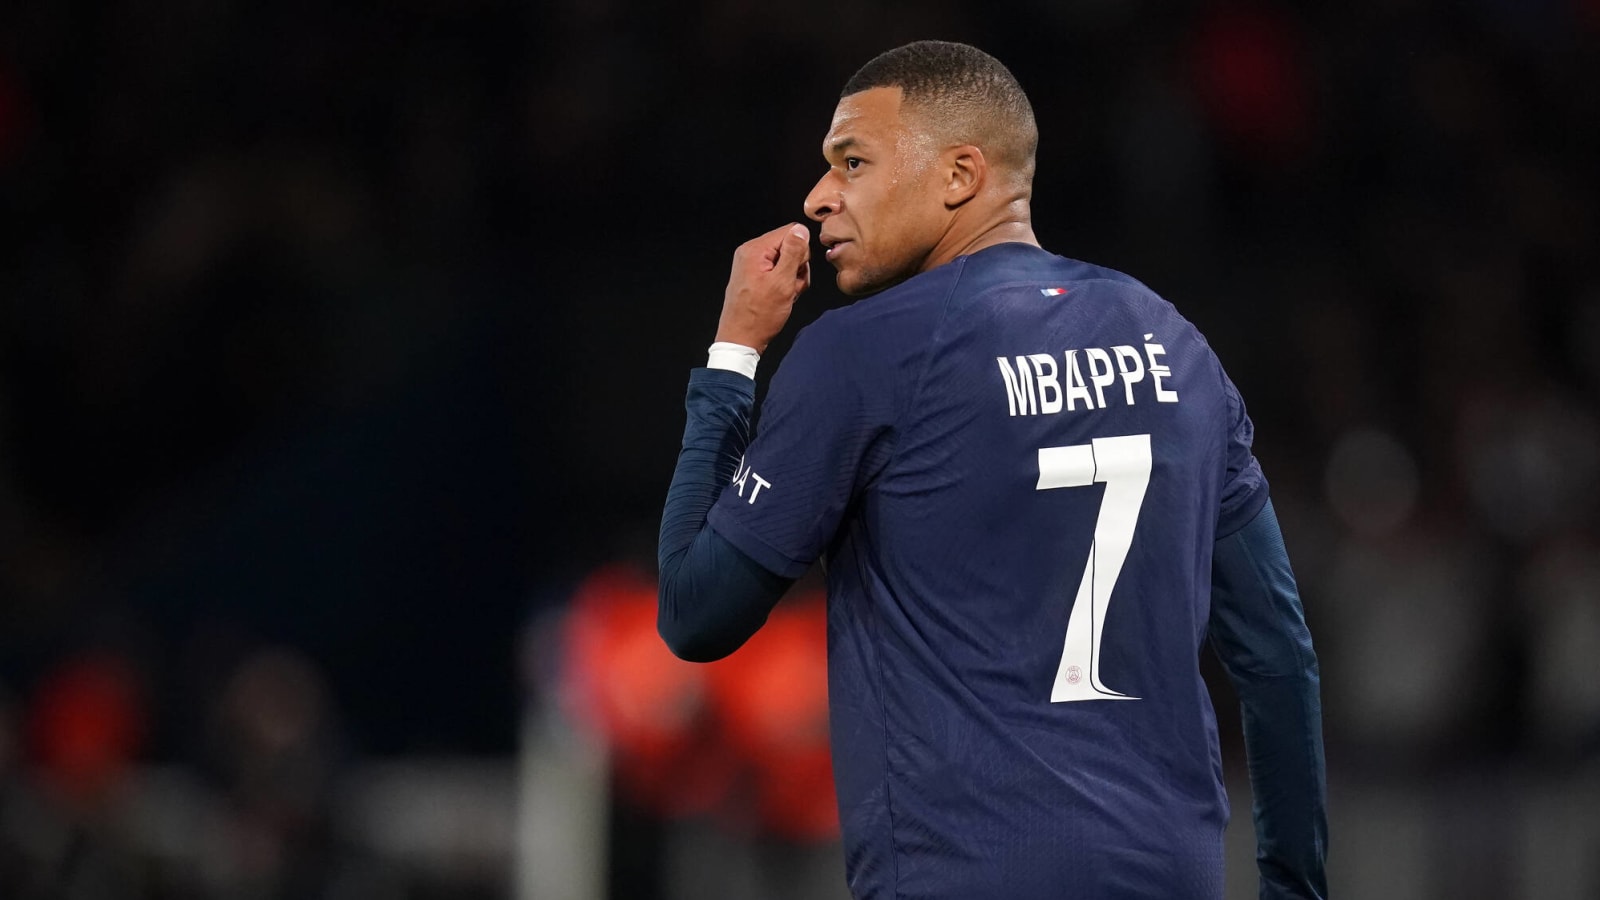 French reports: Kylian Mbappe informs PSG he is leaving at end of season